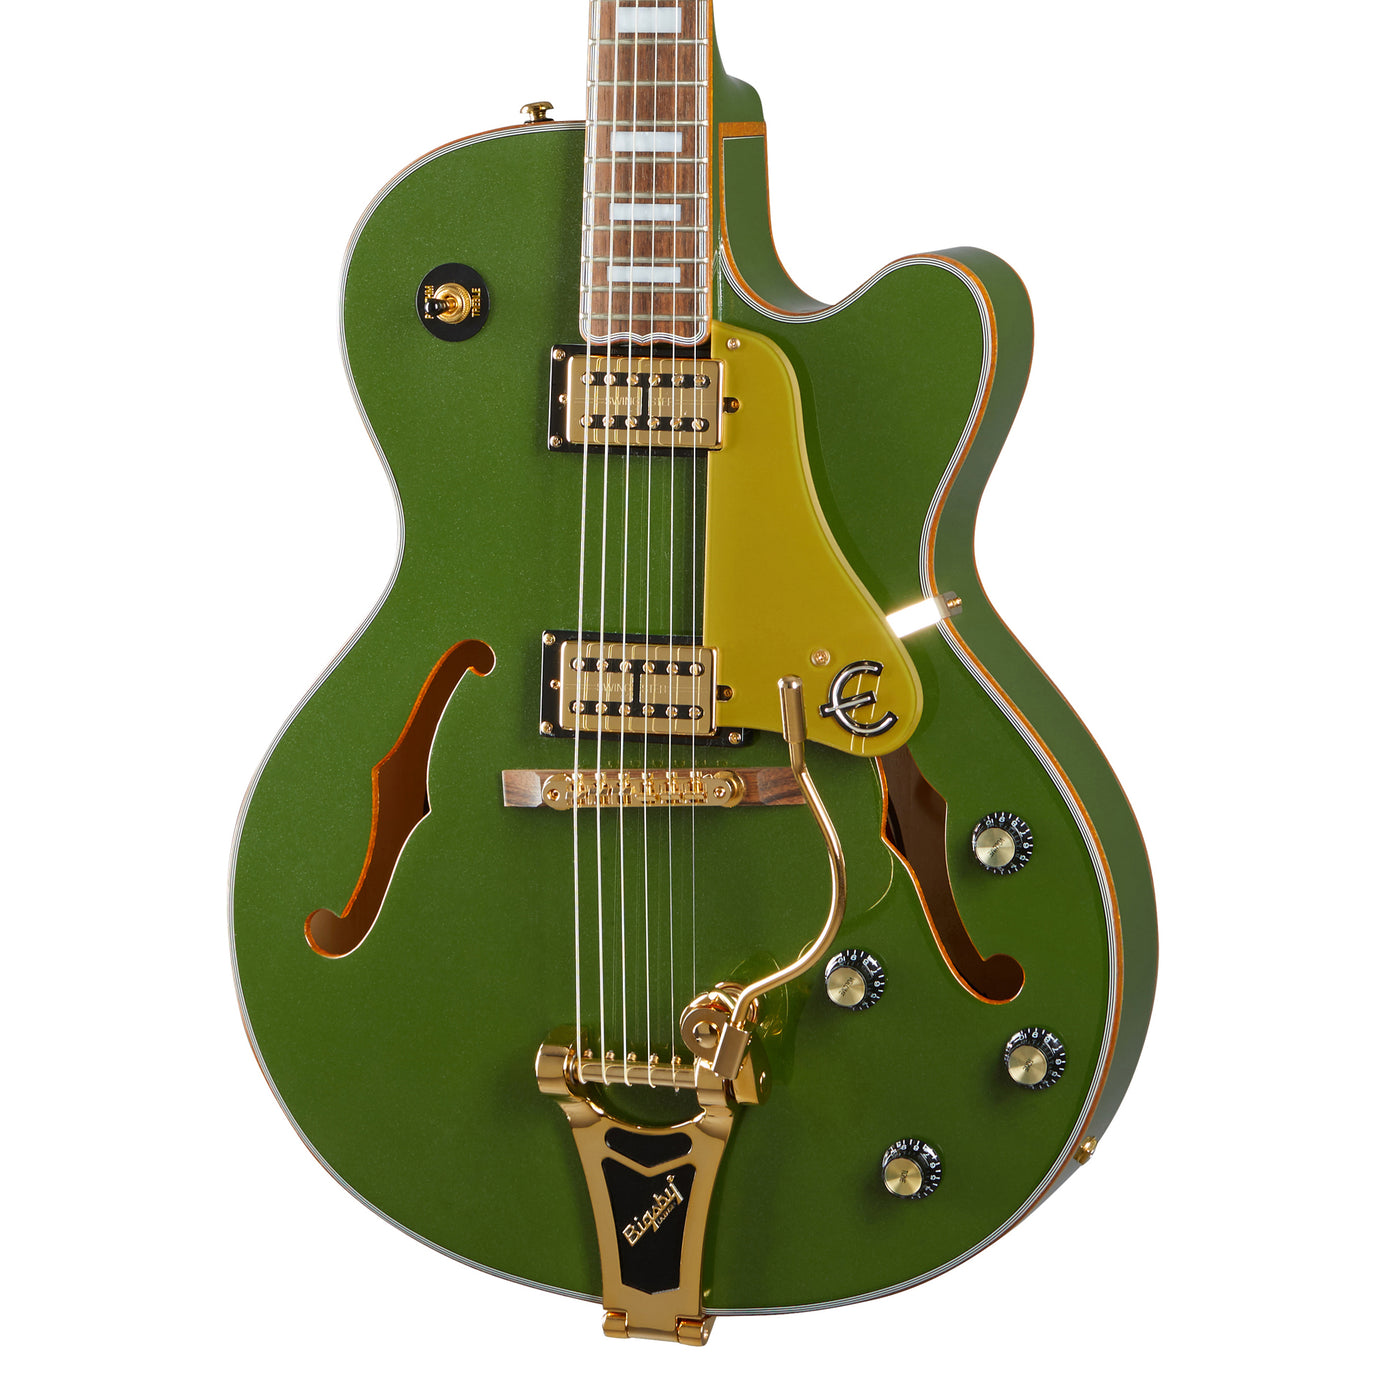 Epiphone Emperor Swingster Hollow Body Guitar - Forest Green Metallic New